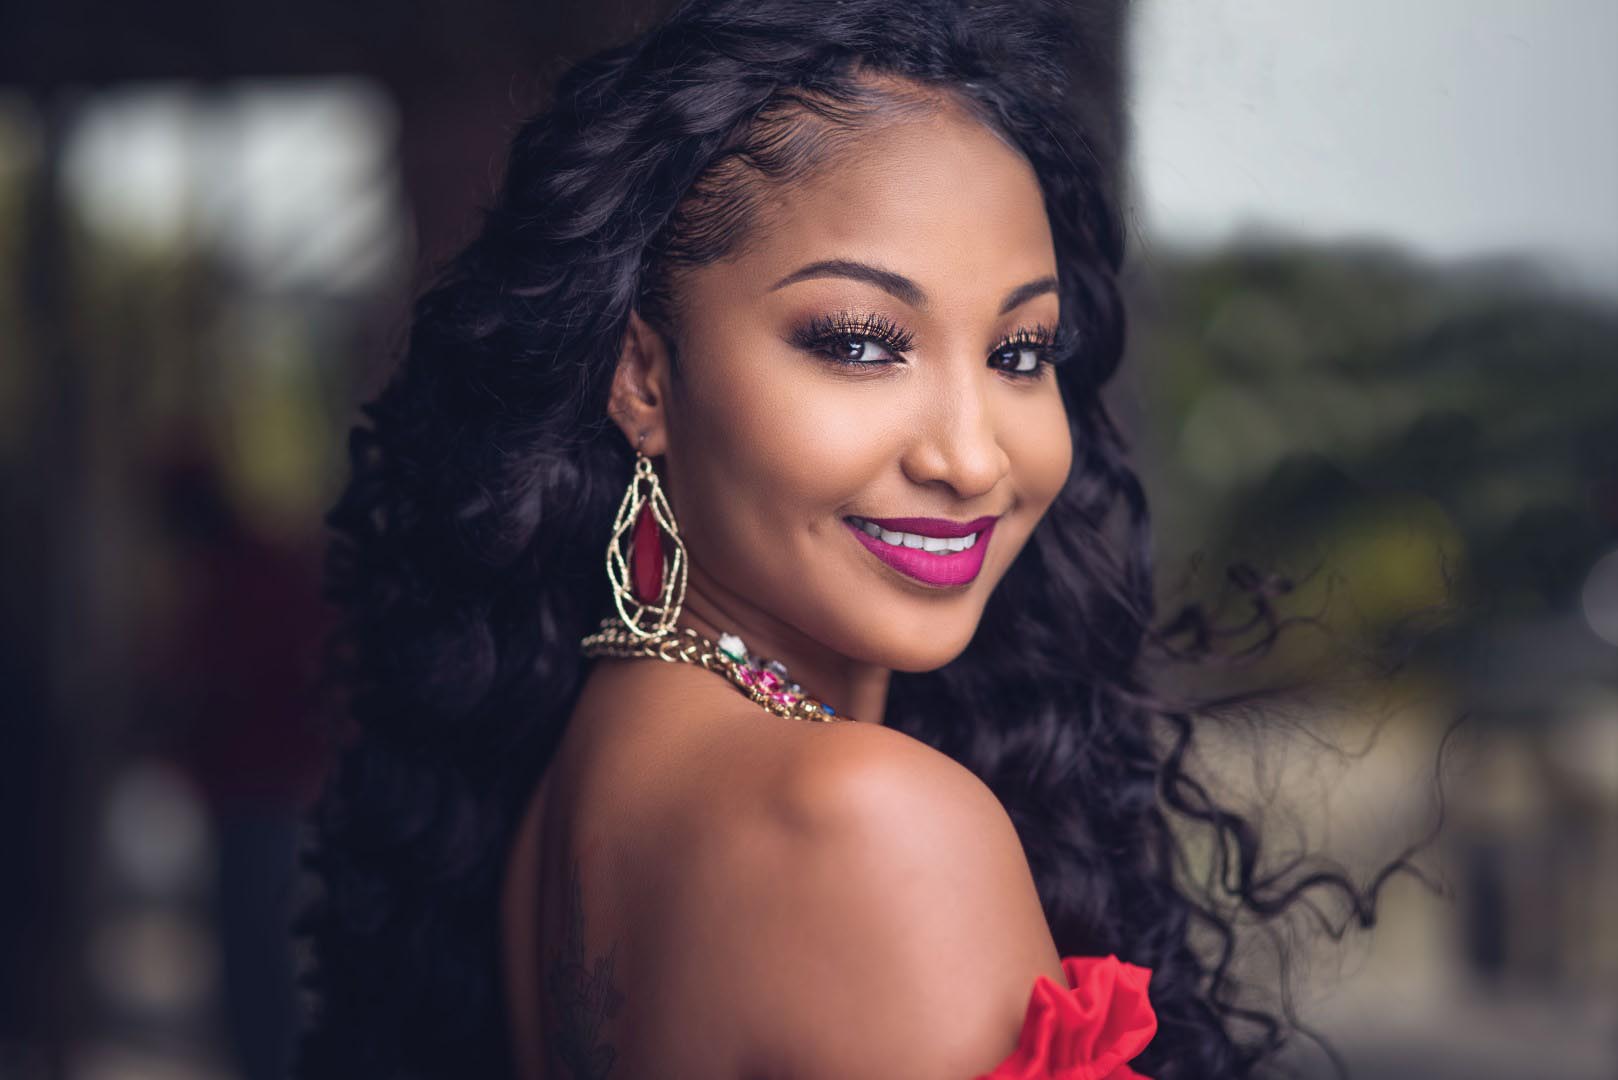 Shenseea Throwback: Shenseea - The World is Hers for the Taking